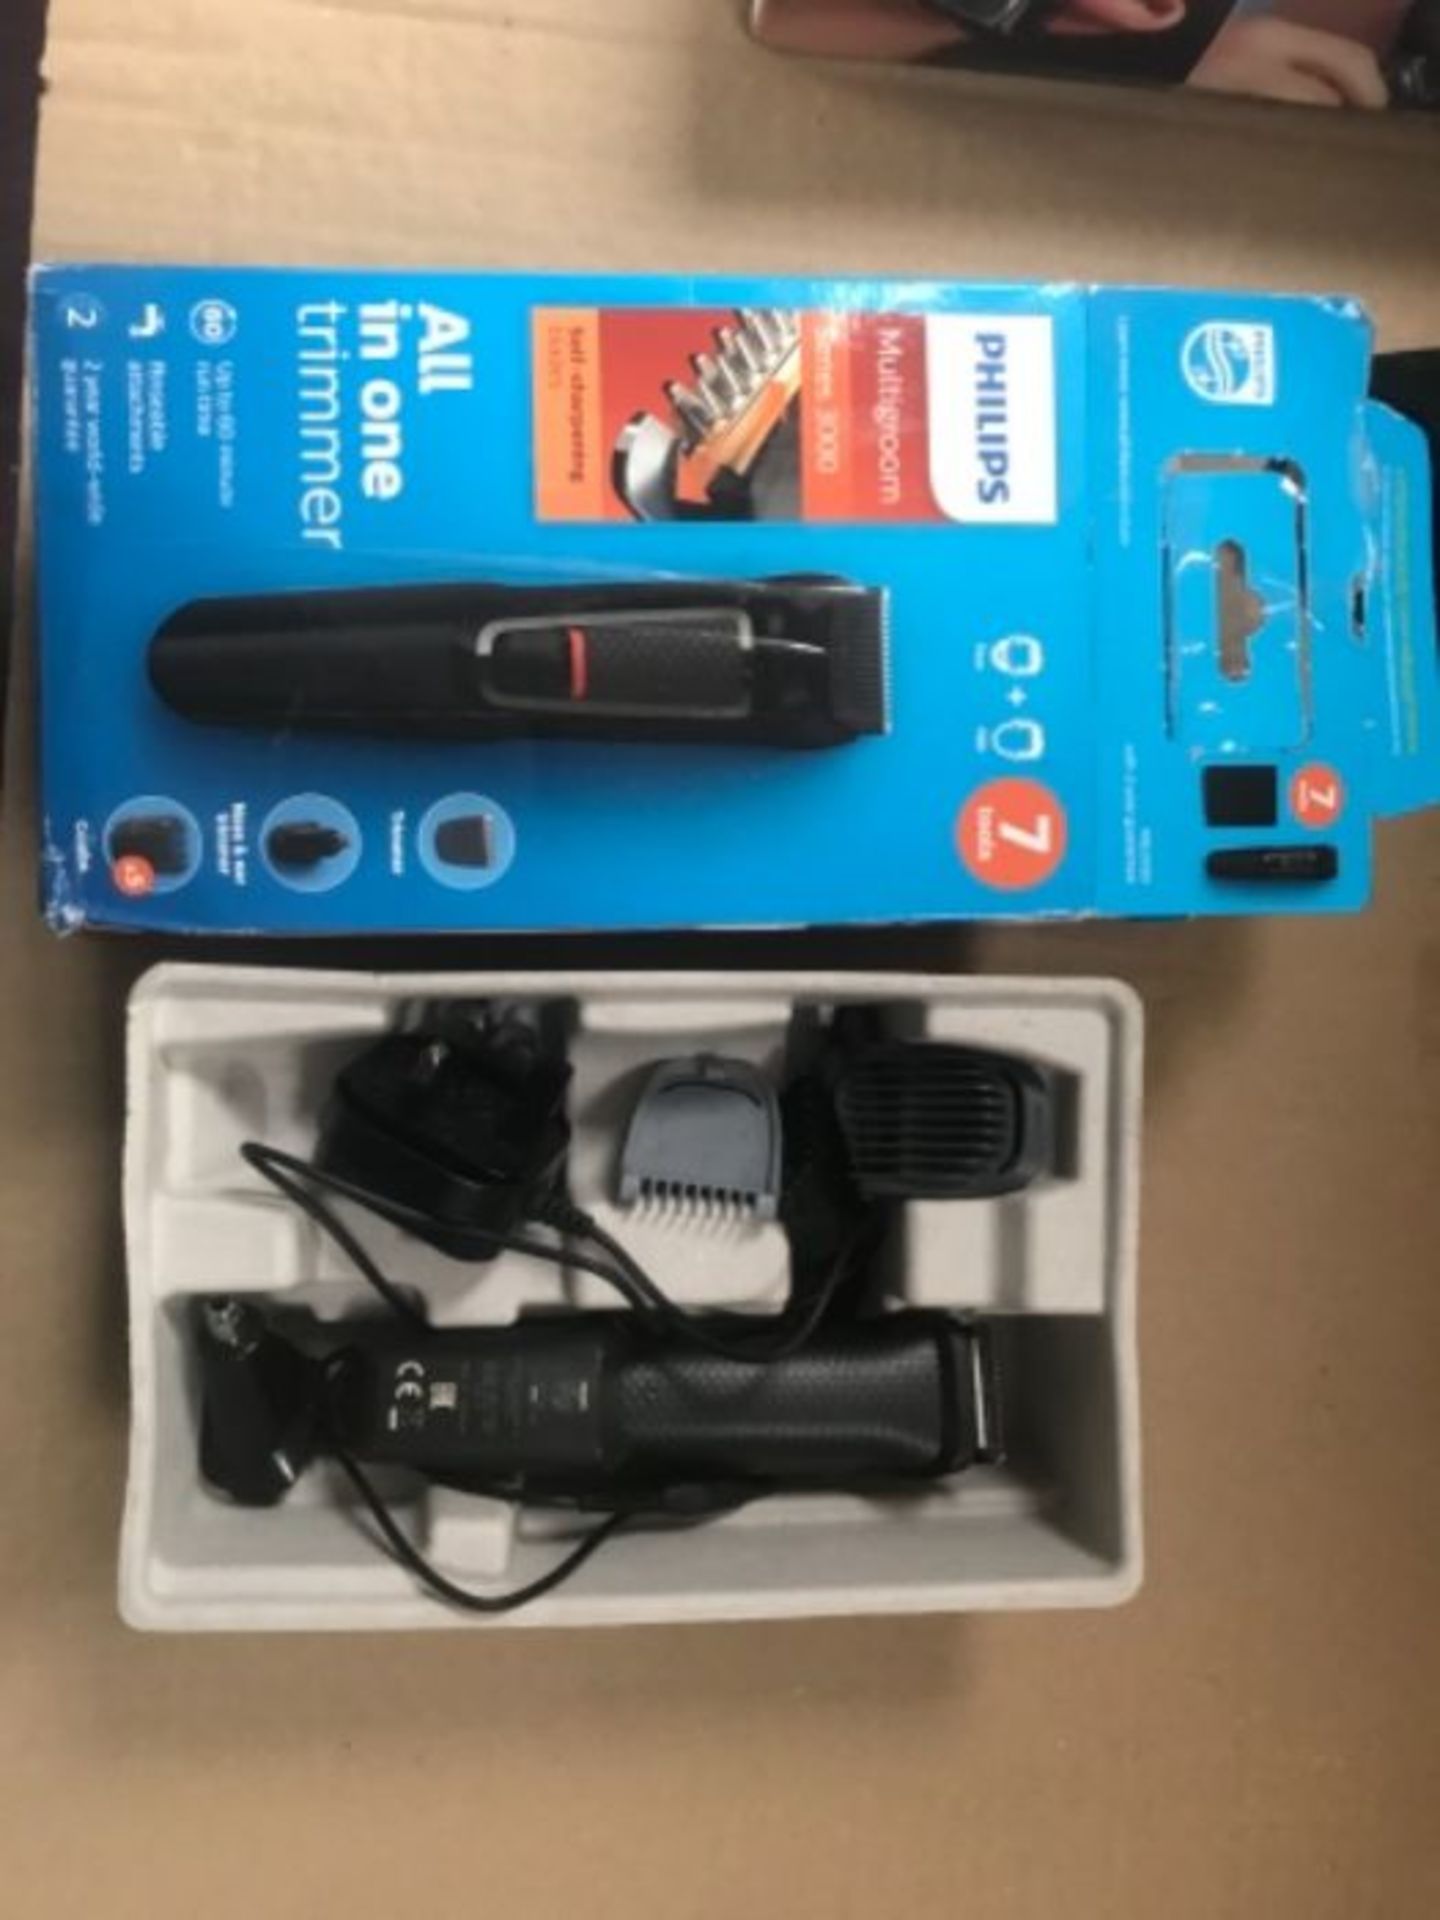 Philips 7-in-1 All-In-One Trimmer, Series 3000 Grooming Kit, Beard Trimmer and Hair Cl - Image 2 of 2